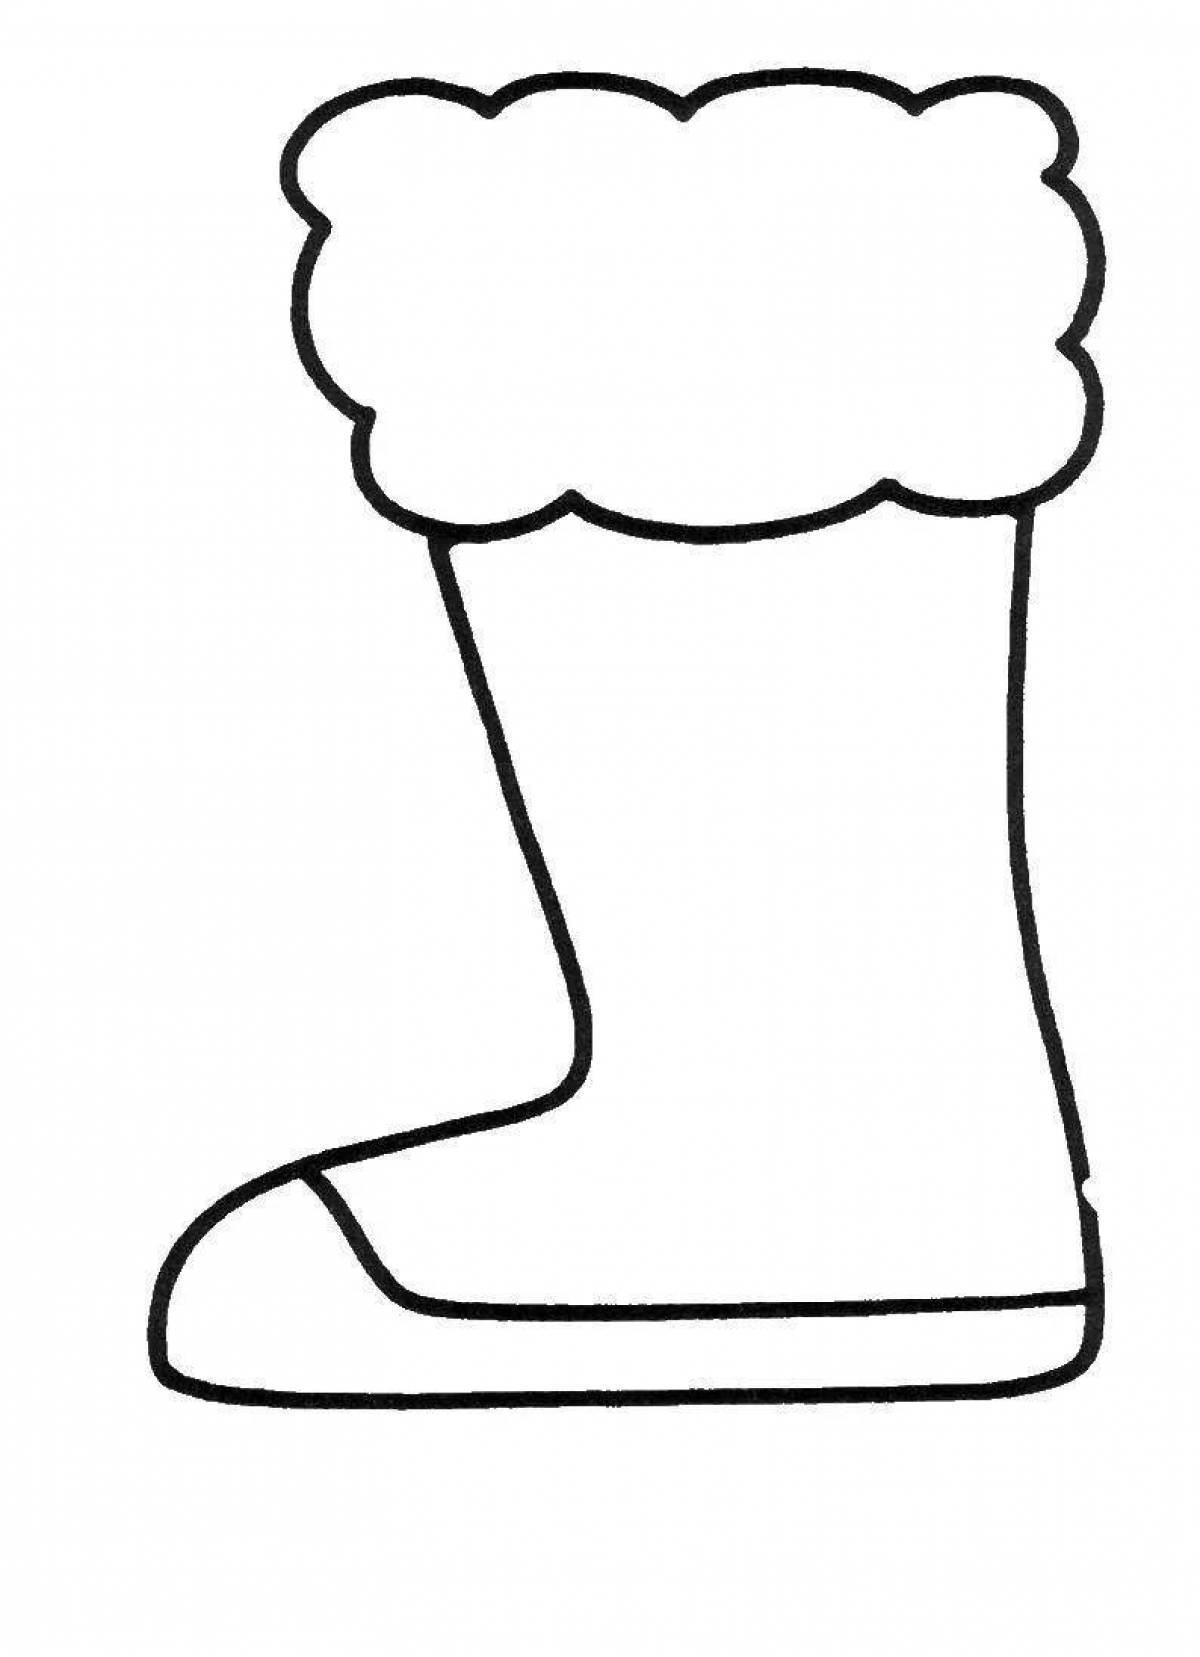 Great winter shoes coloring book for kids